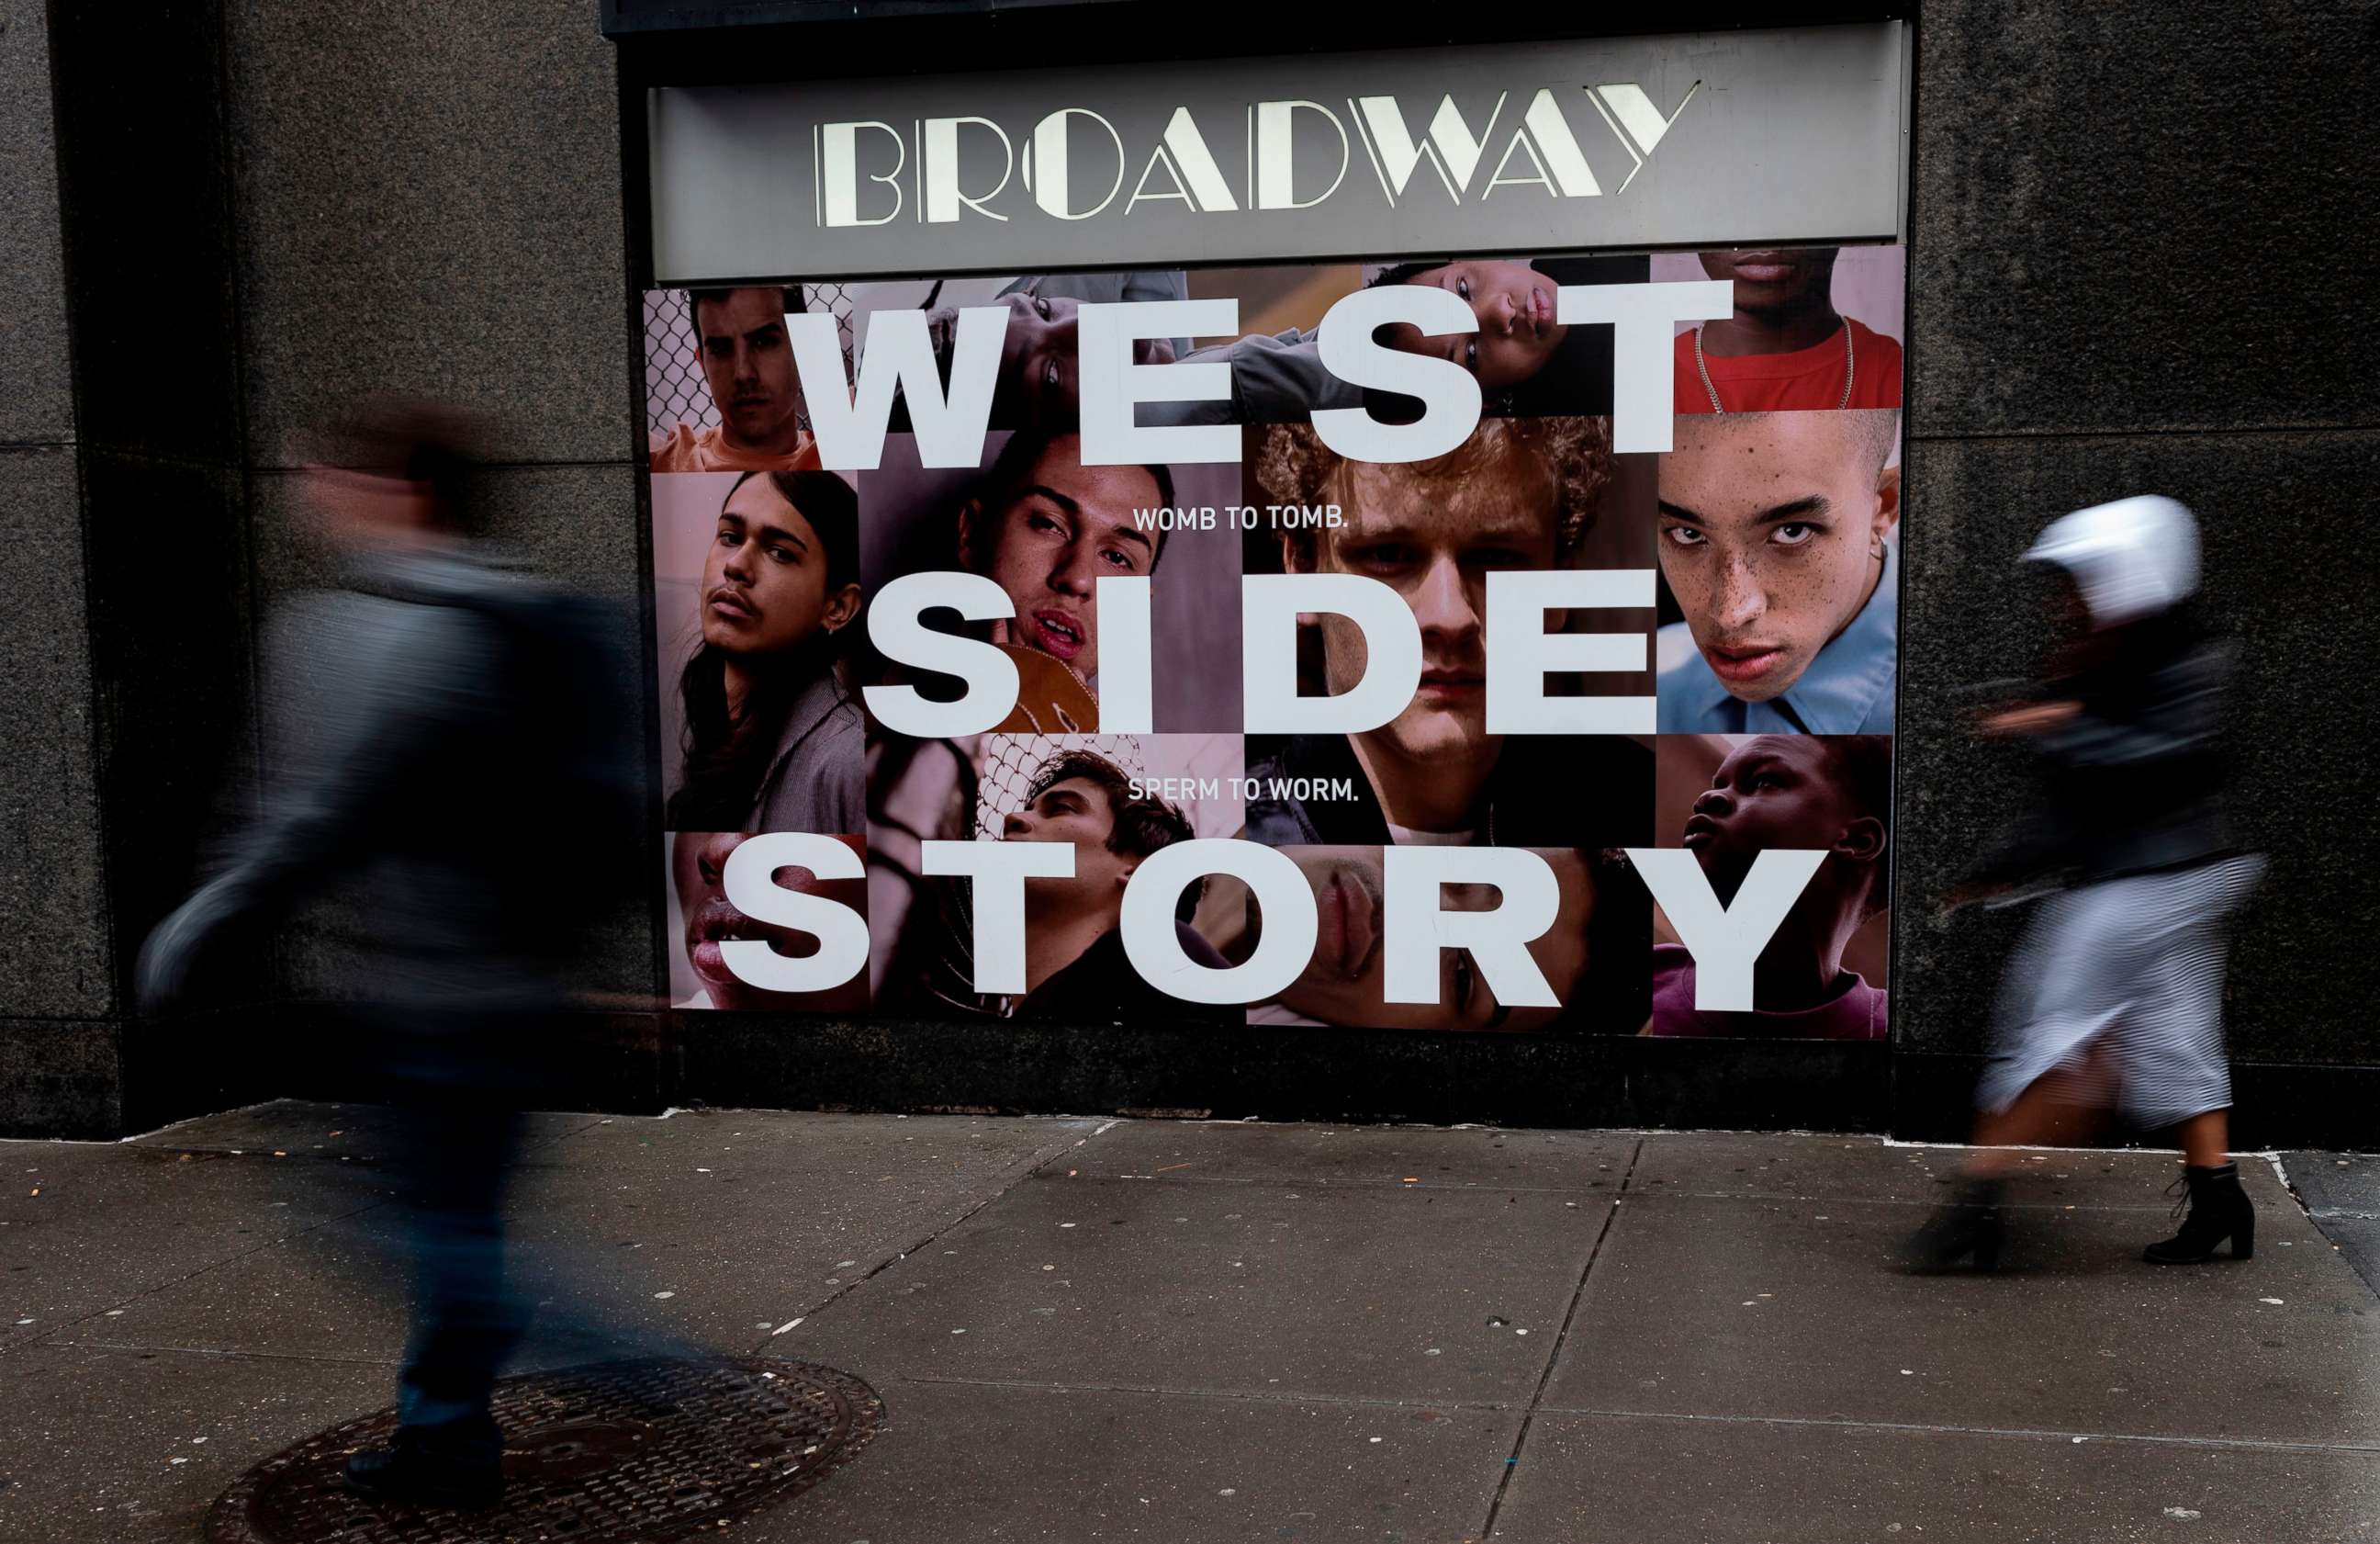 PHOTO: A poster outside the Broadway Theater advertises West Side Story on Feb. 7, 2020, in New York.